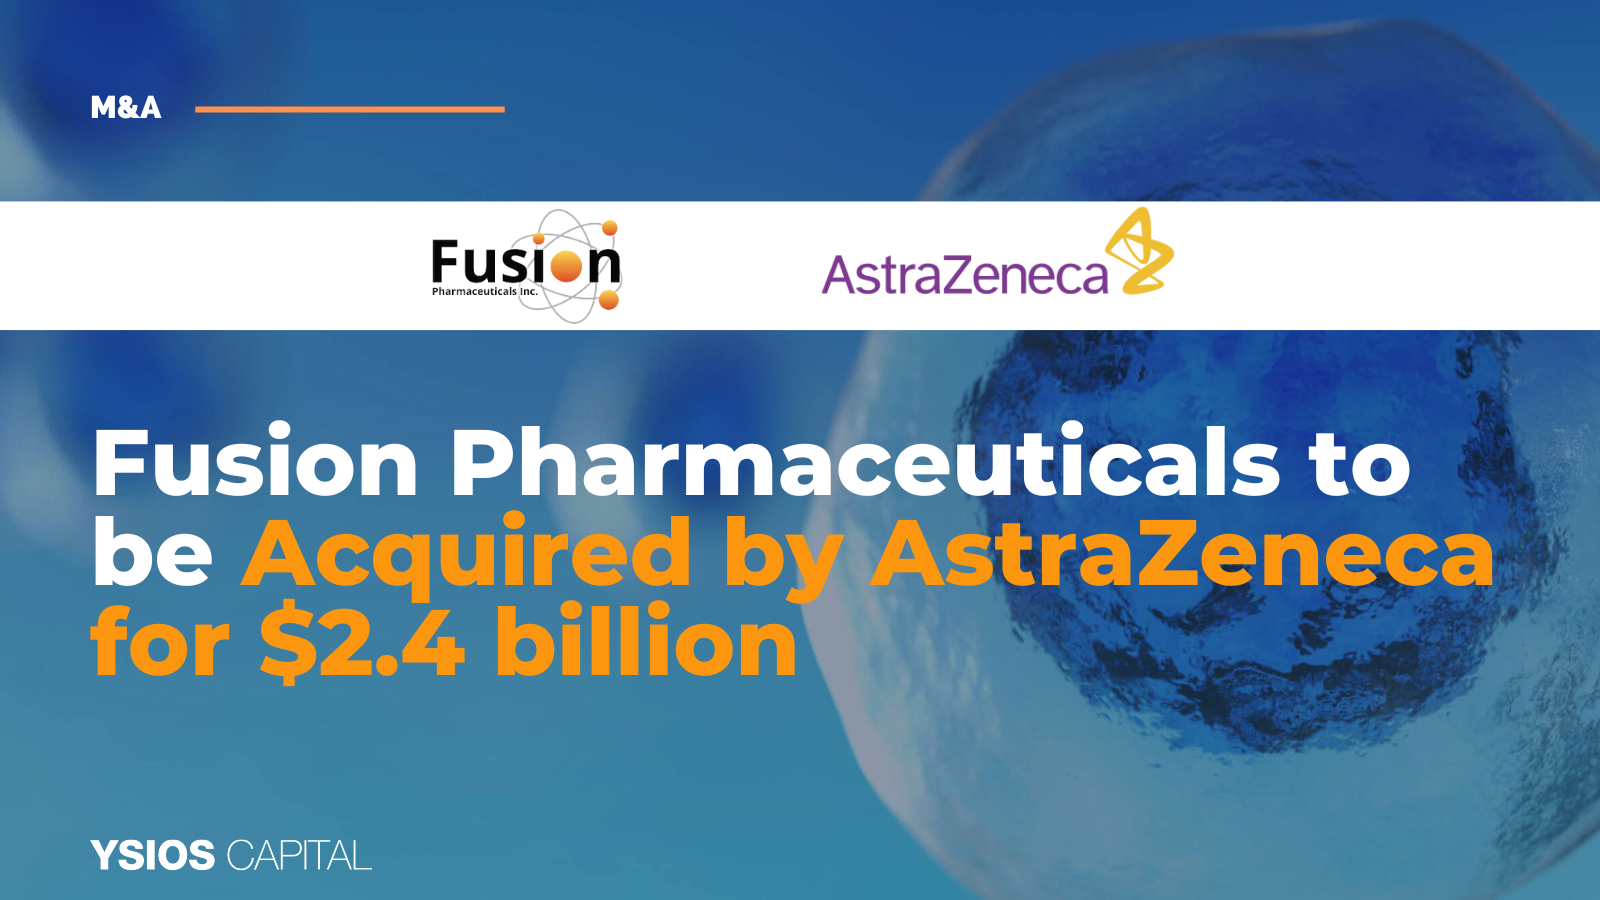 Fusion Pharmaceuticals To Be Acquired By AstraZeneca, Accelerating Development Of Next-Generation Radioconjugates To Treat Cancer